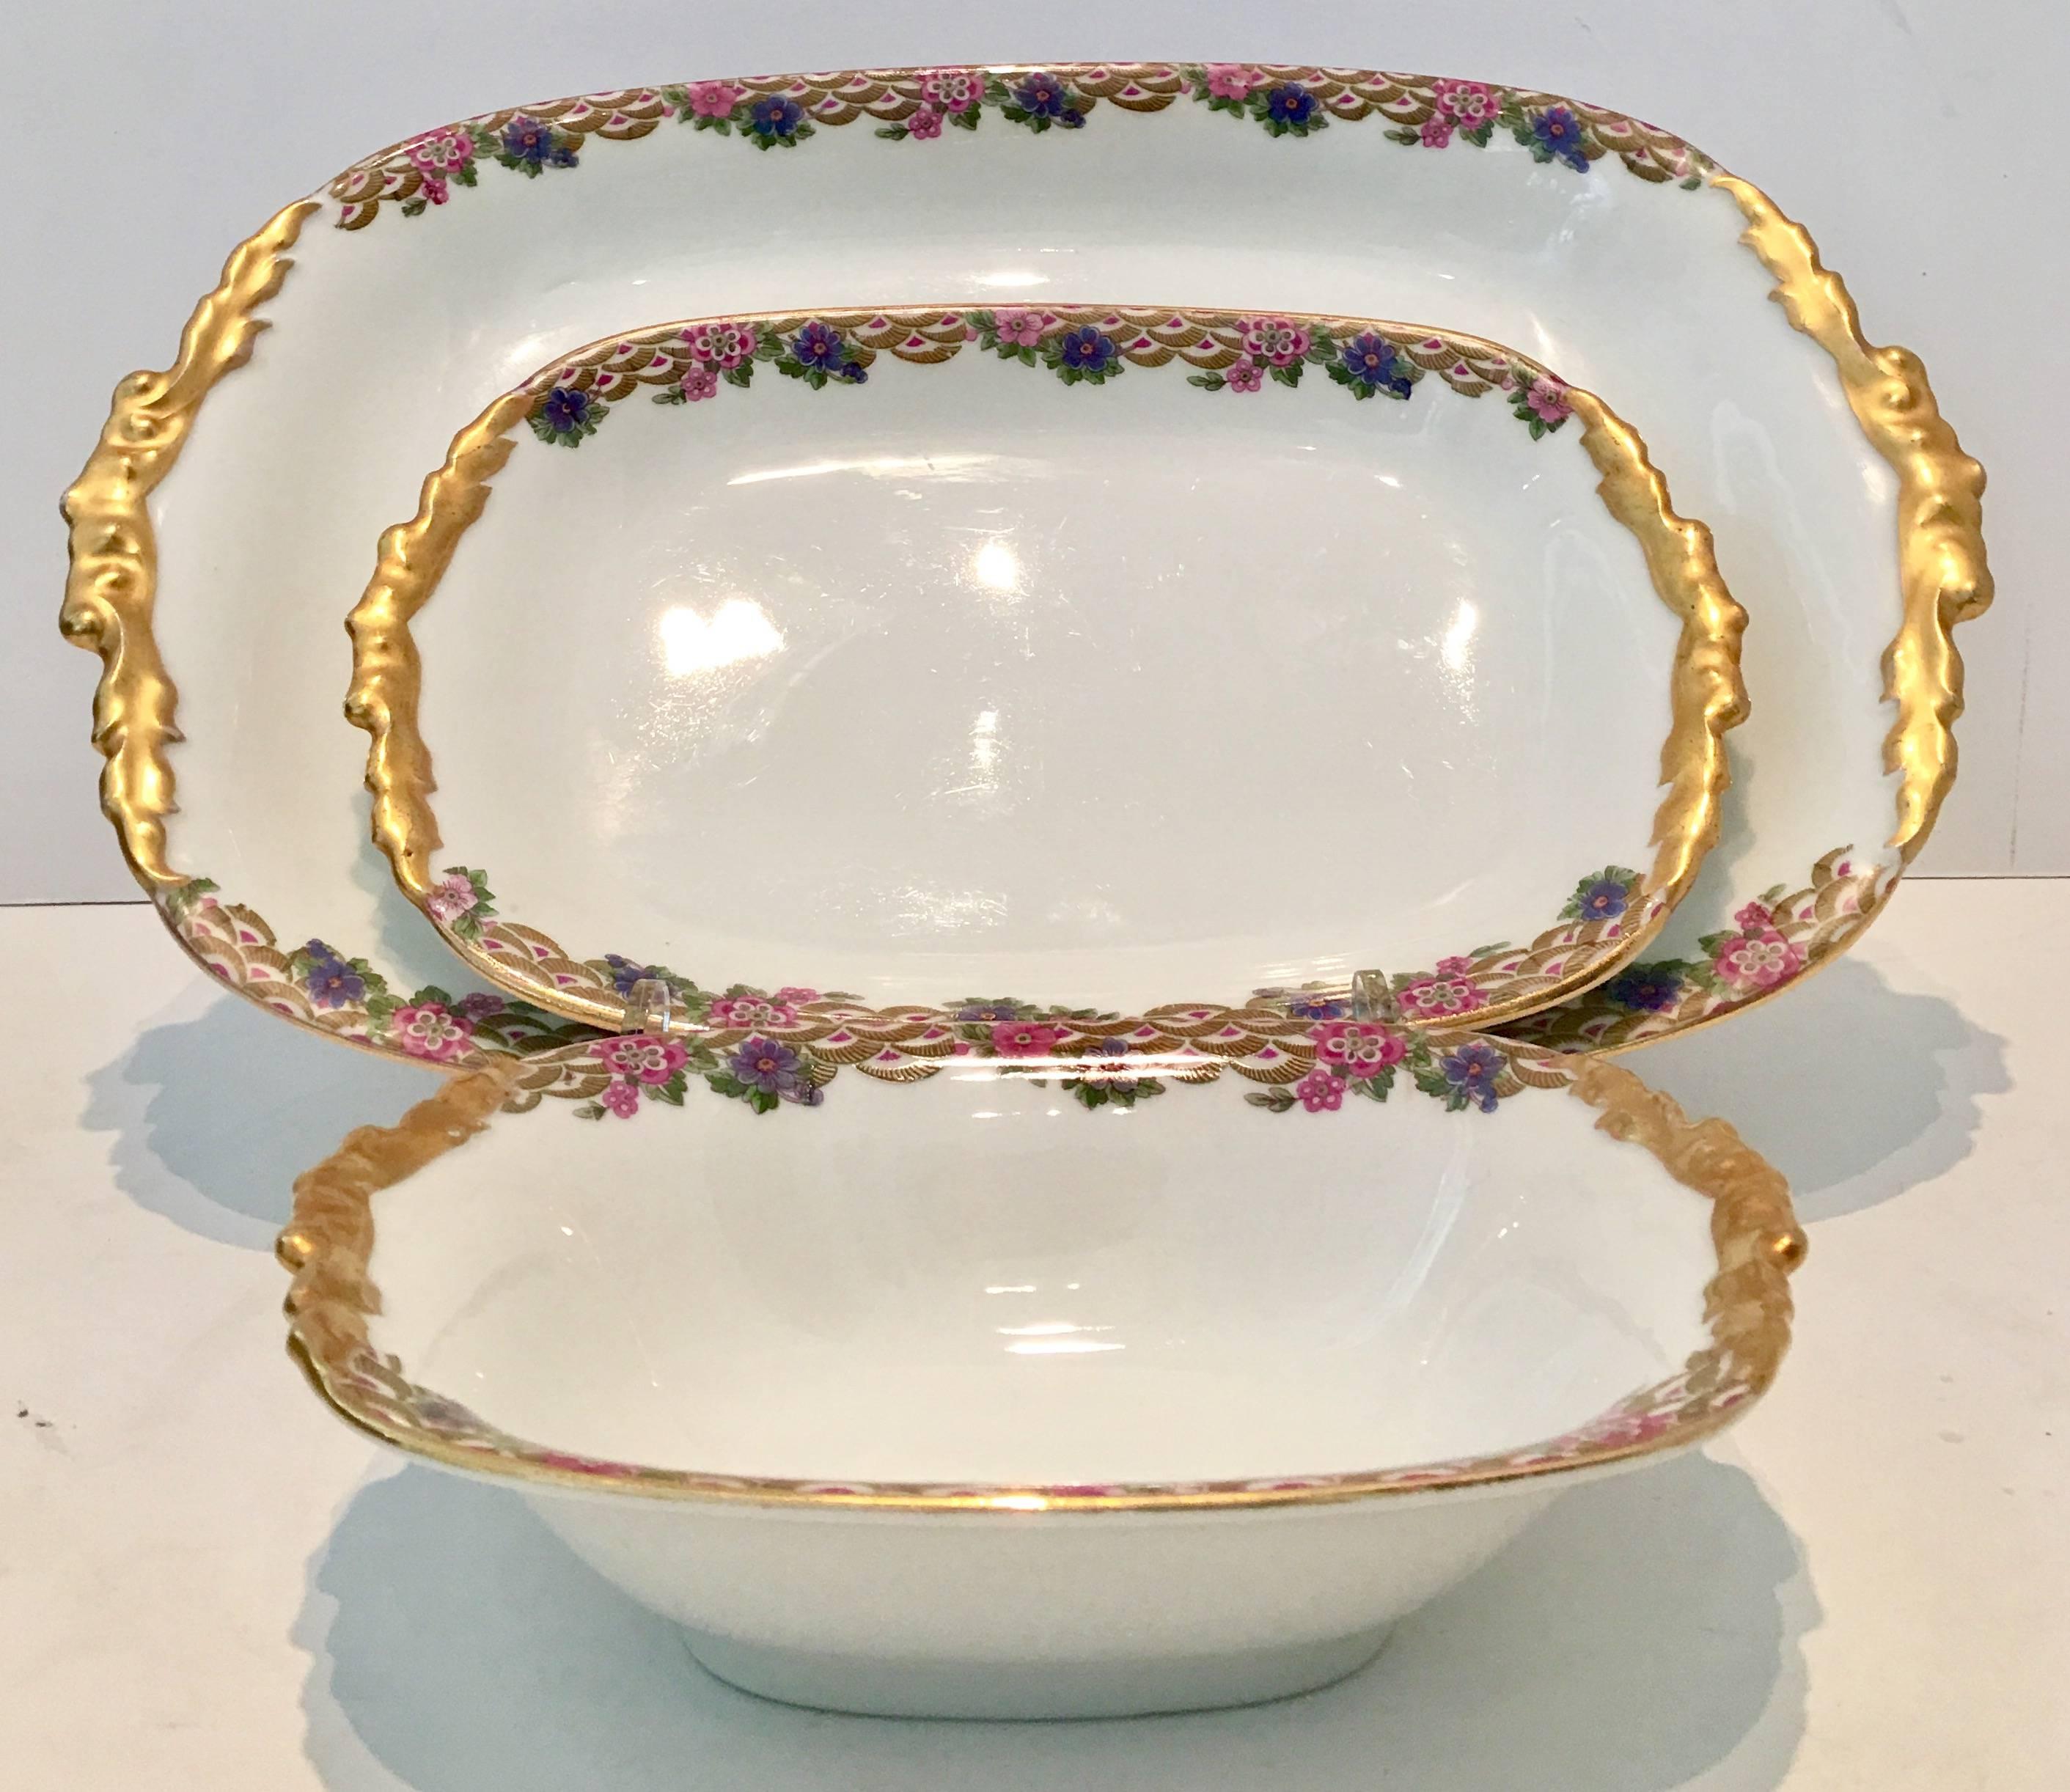 Early 20th century Art Deco French Limoge hand-painted Porcelain by, Jean Pouyat dinnerware set of three serving pieces. This Art Deco pattern features a bright white ground and purple, pink, chartreuse and green geometric floral pattern edge and